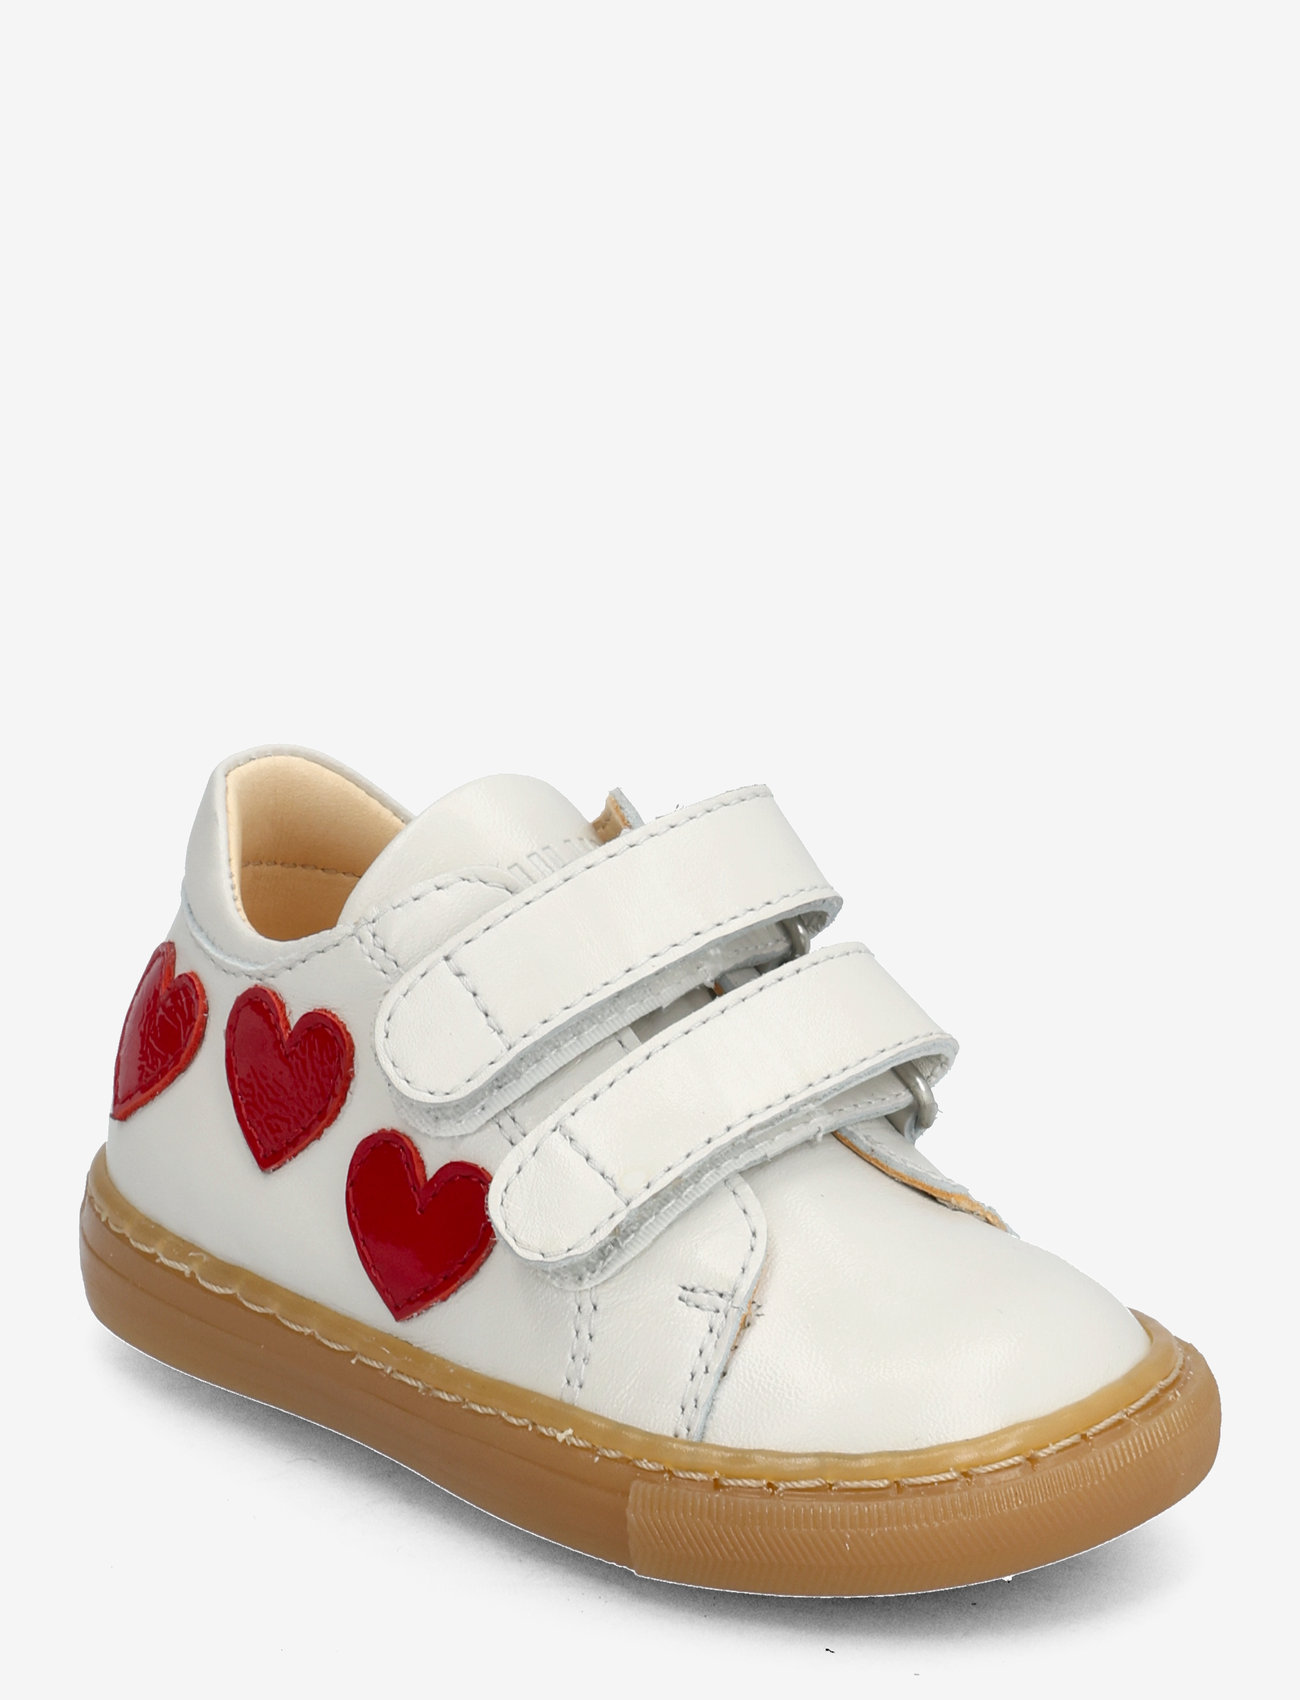 ANGULUS - Shoes - flat - with velcro - sommerkupp - 1493/a003 off white/hearts - 0